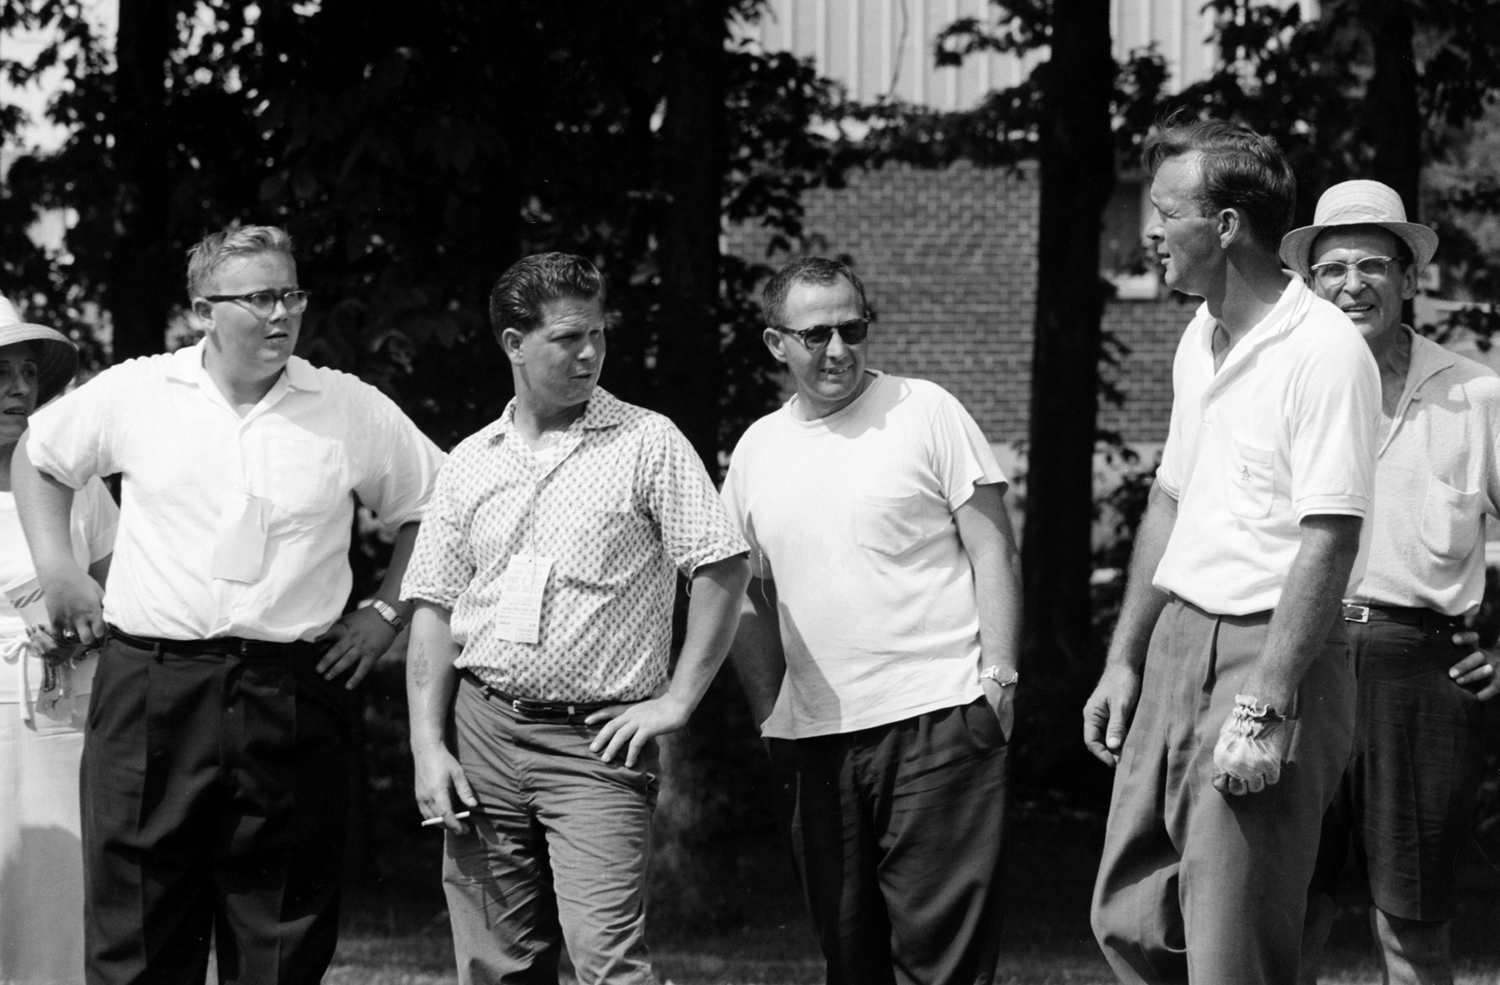 Arnold Palmer and his admiring fans, 1962.